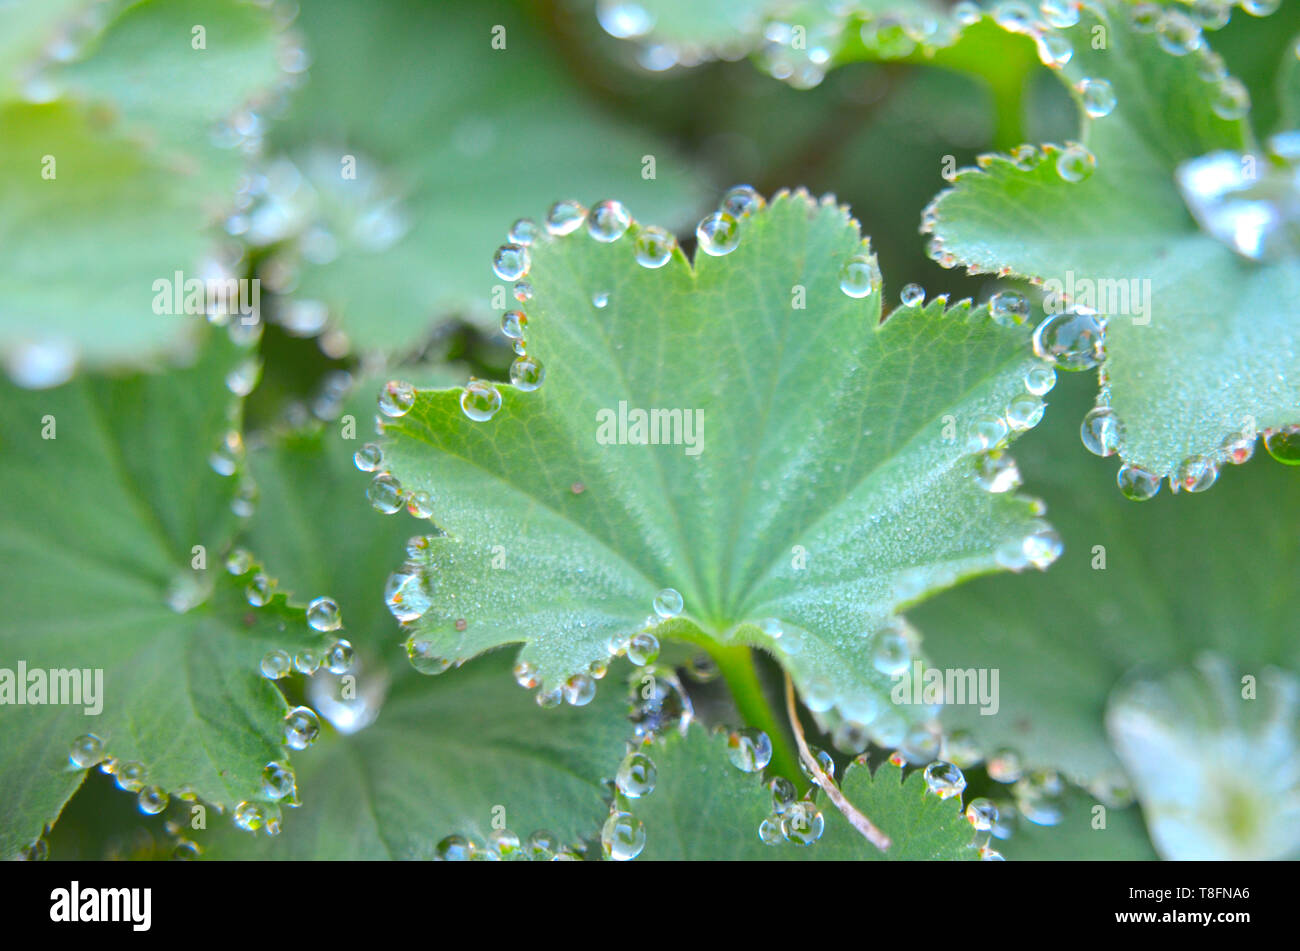 Alchemilla vulgaris (common lady's mantle) leafs with sparkling dew droplets, often used in herbal medicine, especially to cure gynecological problems Stock Photo